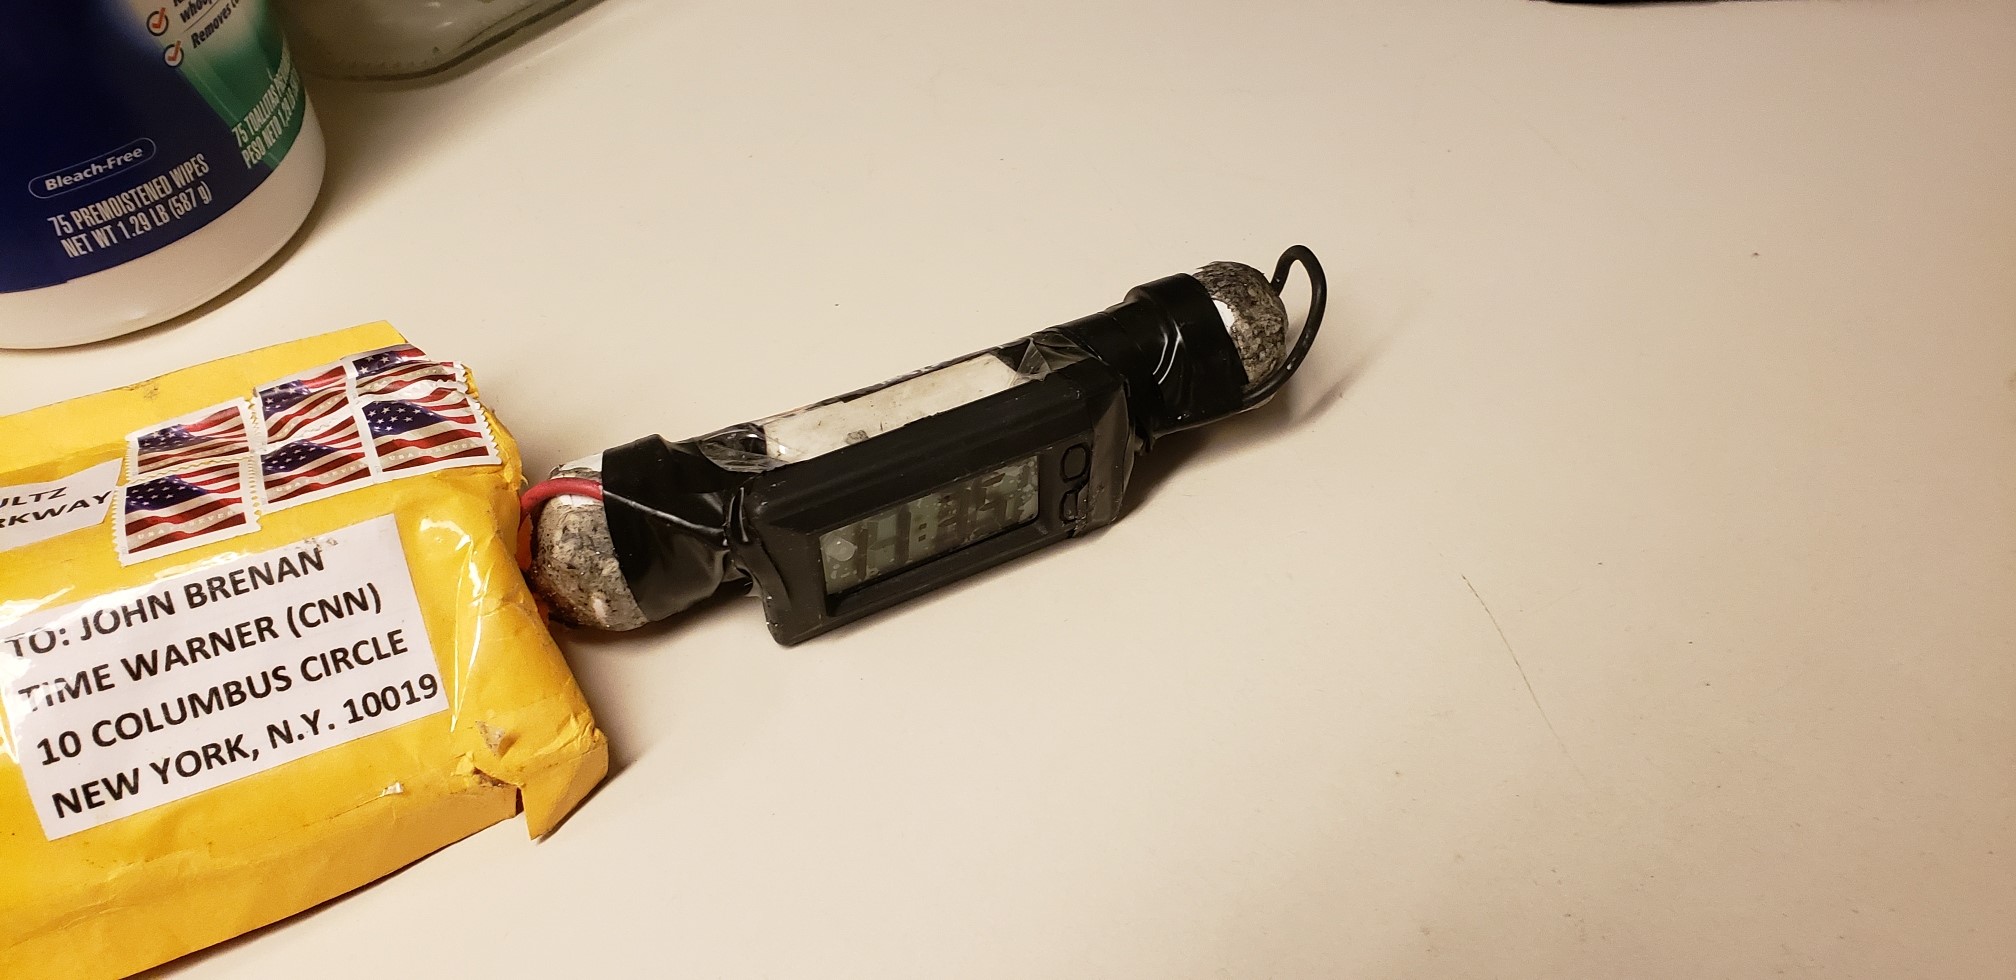 PHOTO: A photo of the device recovered from CNN by the NYPD bomb squad on Oct. 24, 2018, as confirmed by two law enforcement officials.